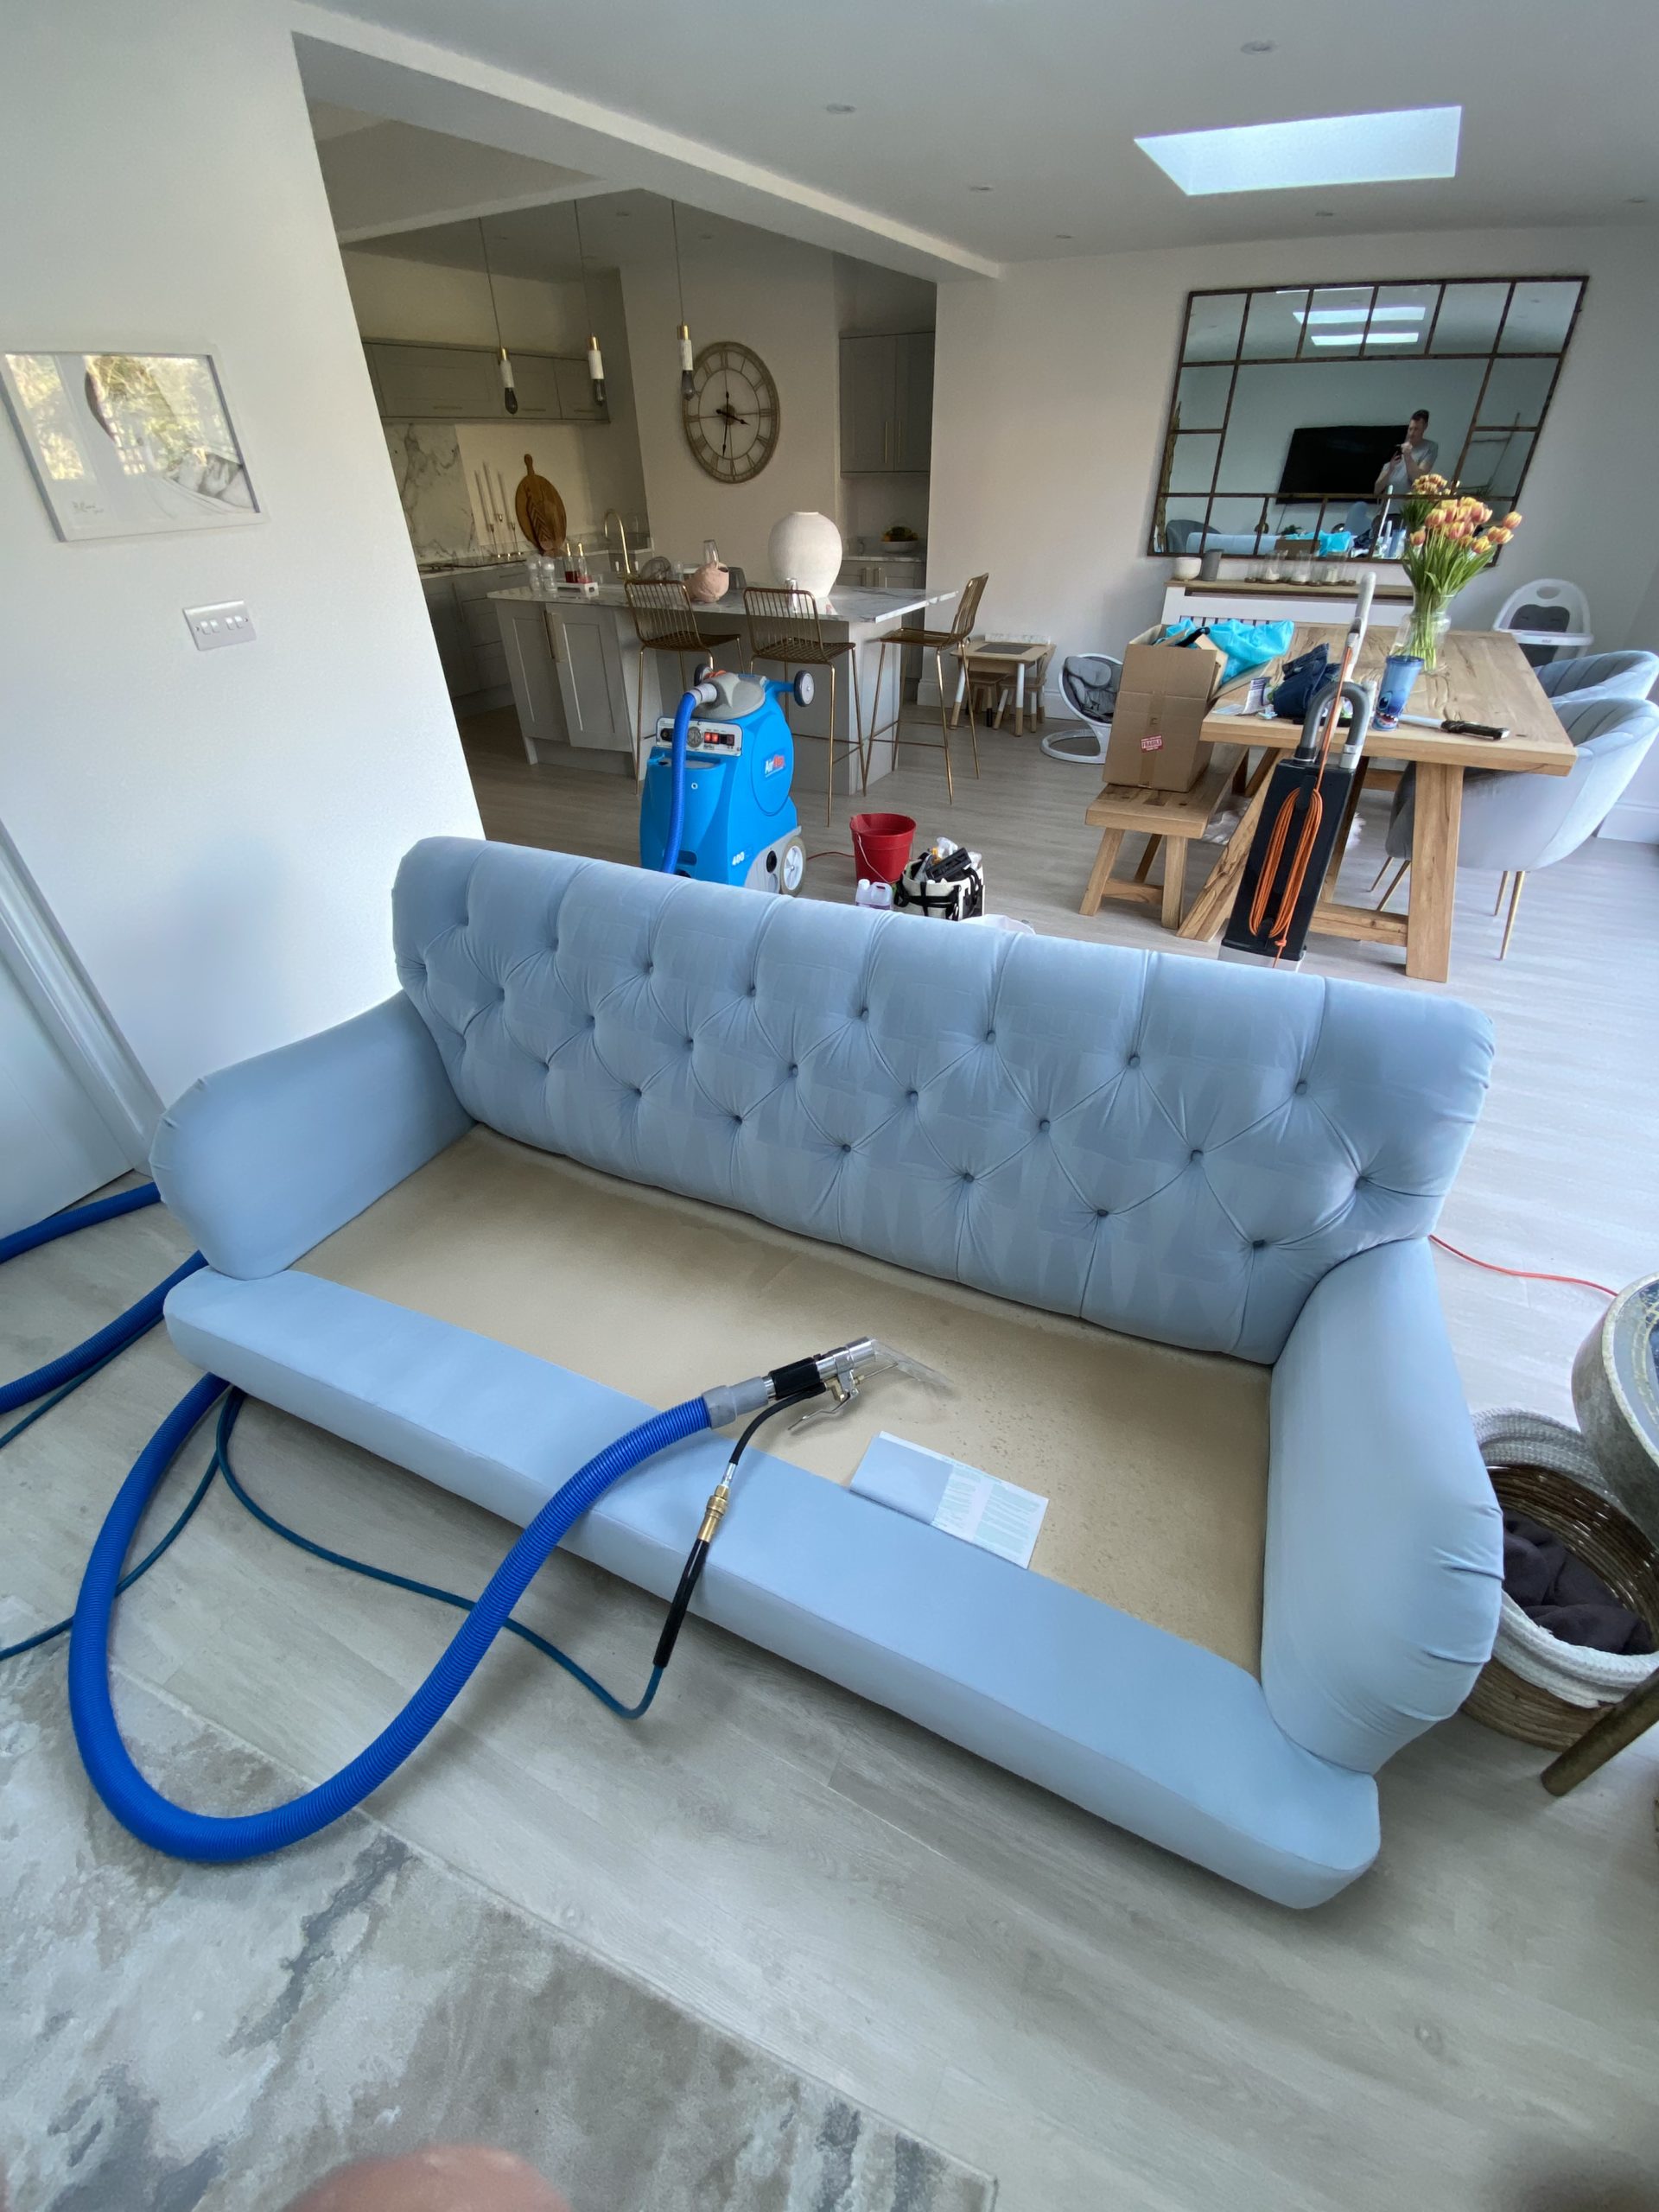 Upholstery Cleaning Leeds The City